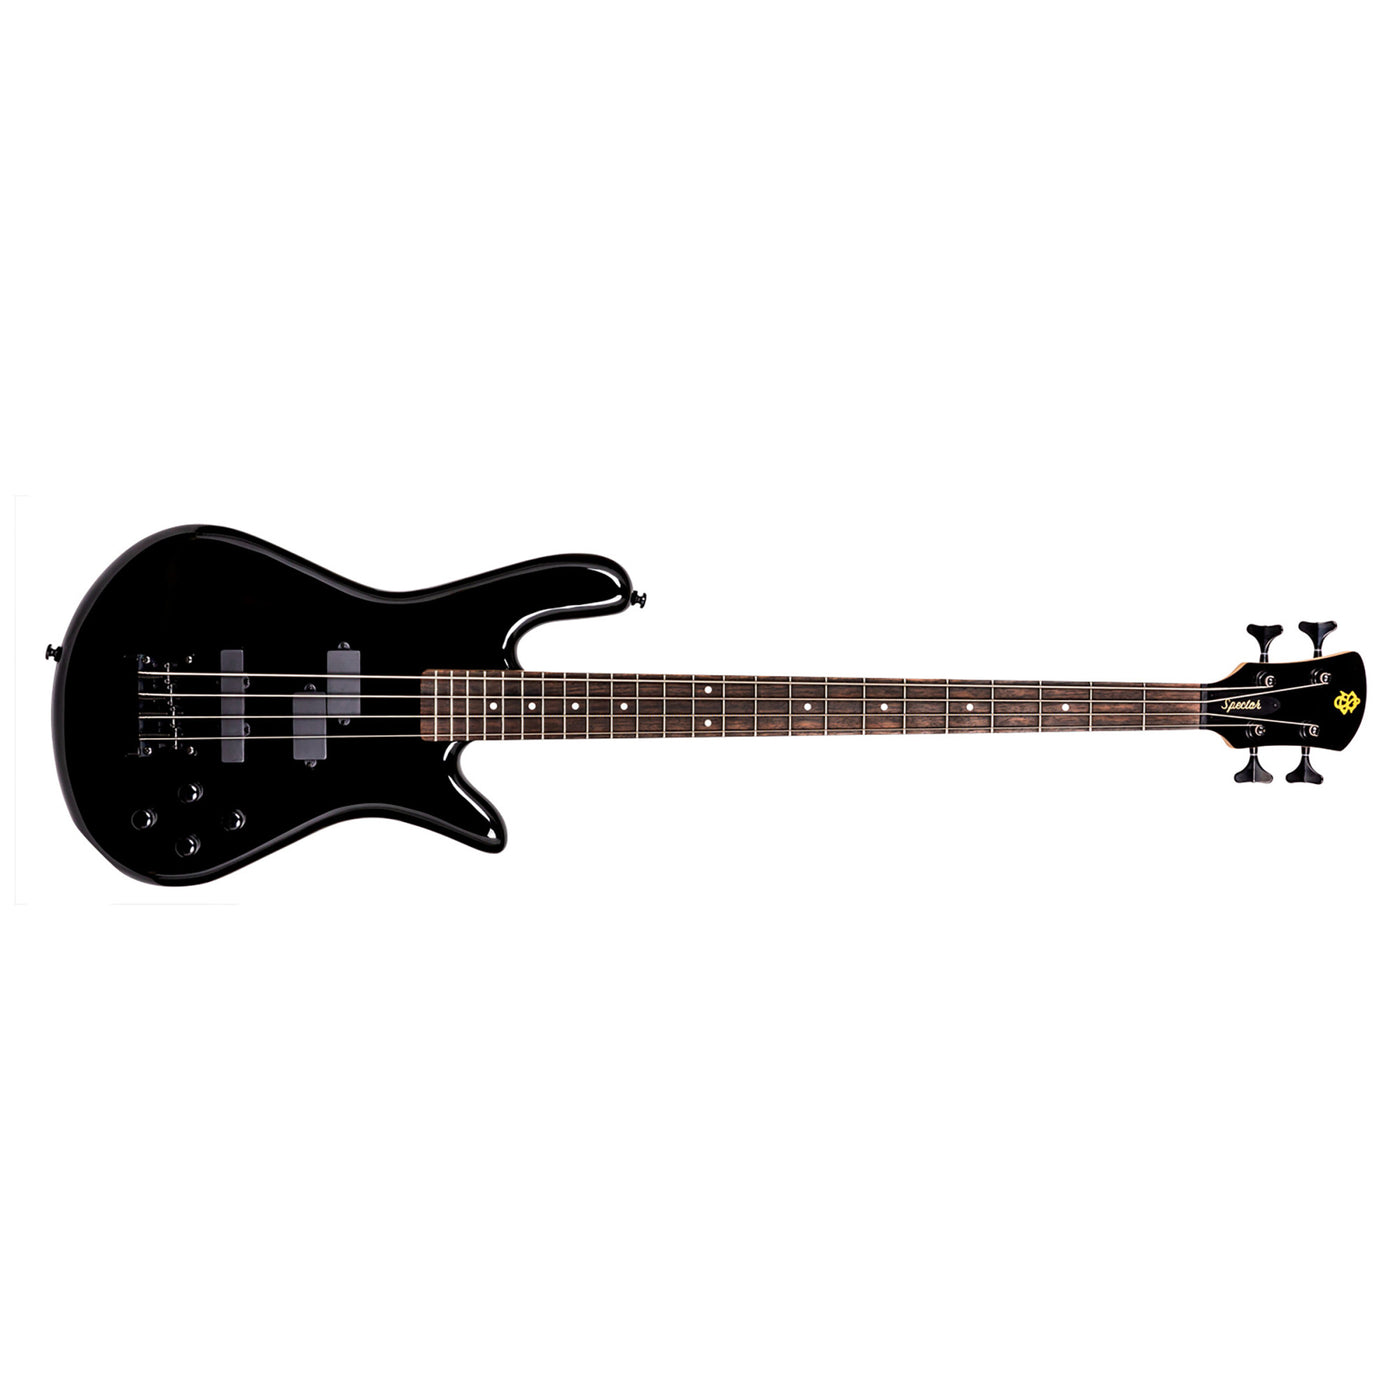 Spector Performer 4 Electric Bass Guitar - Solid Black Gloss